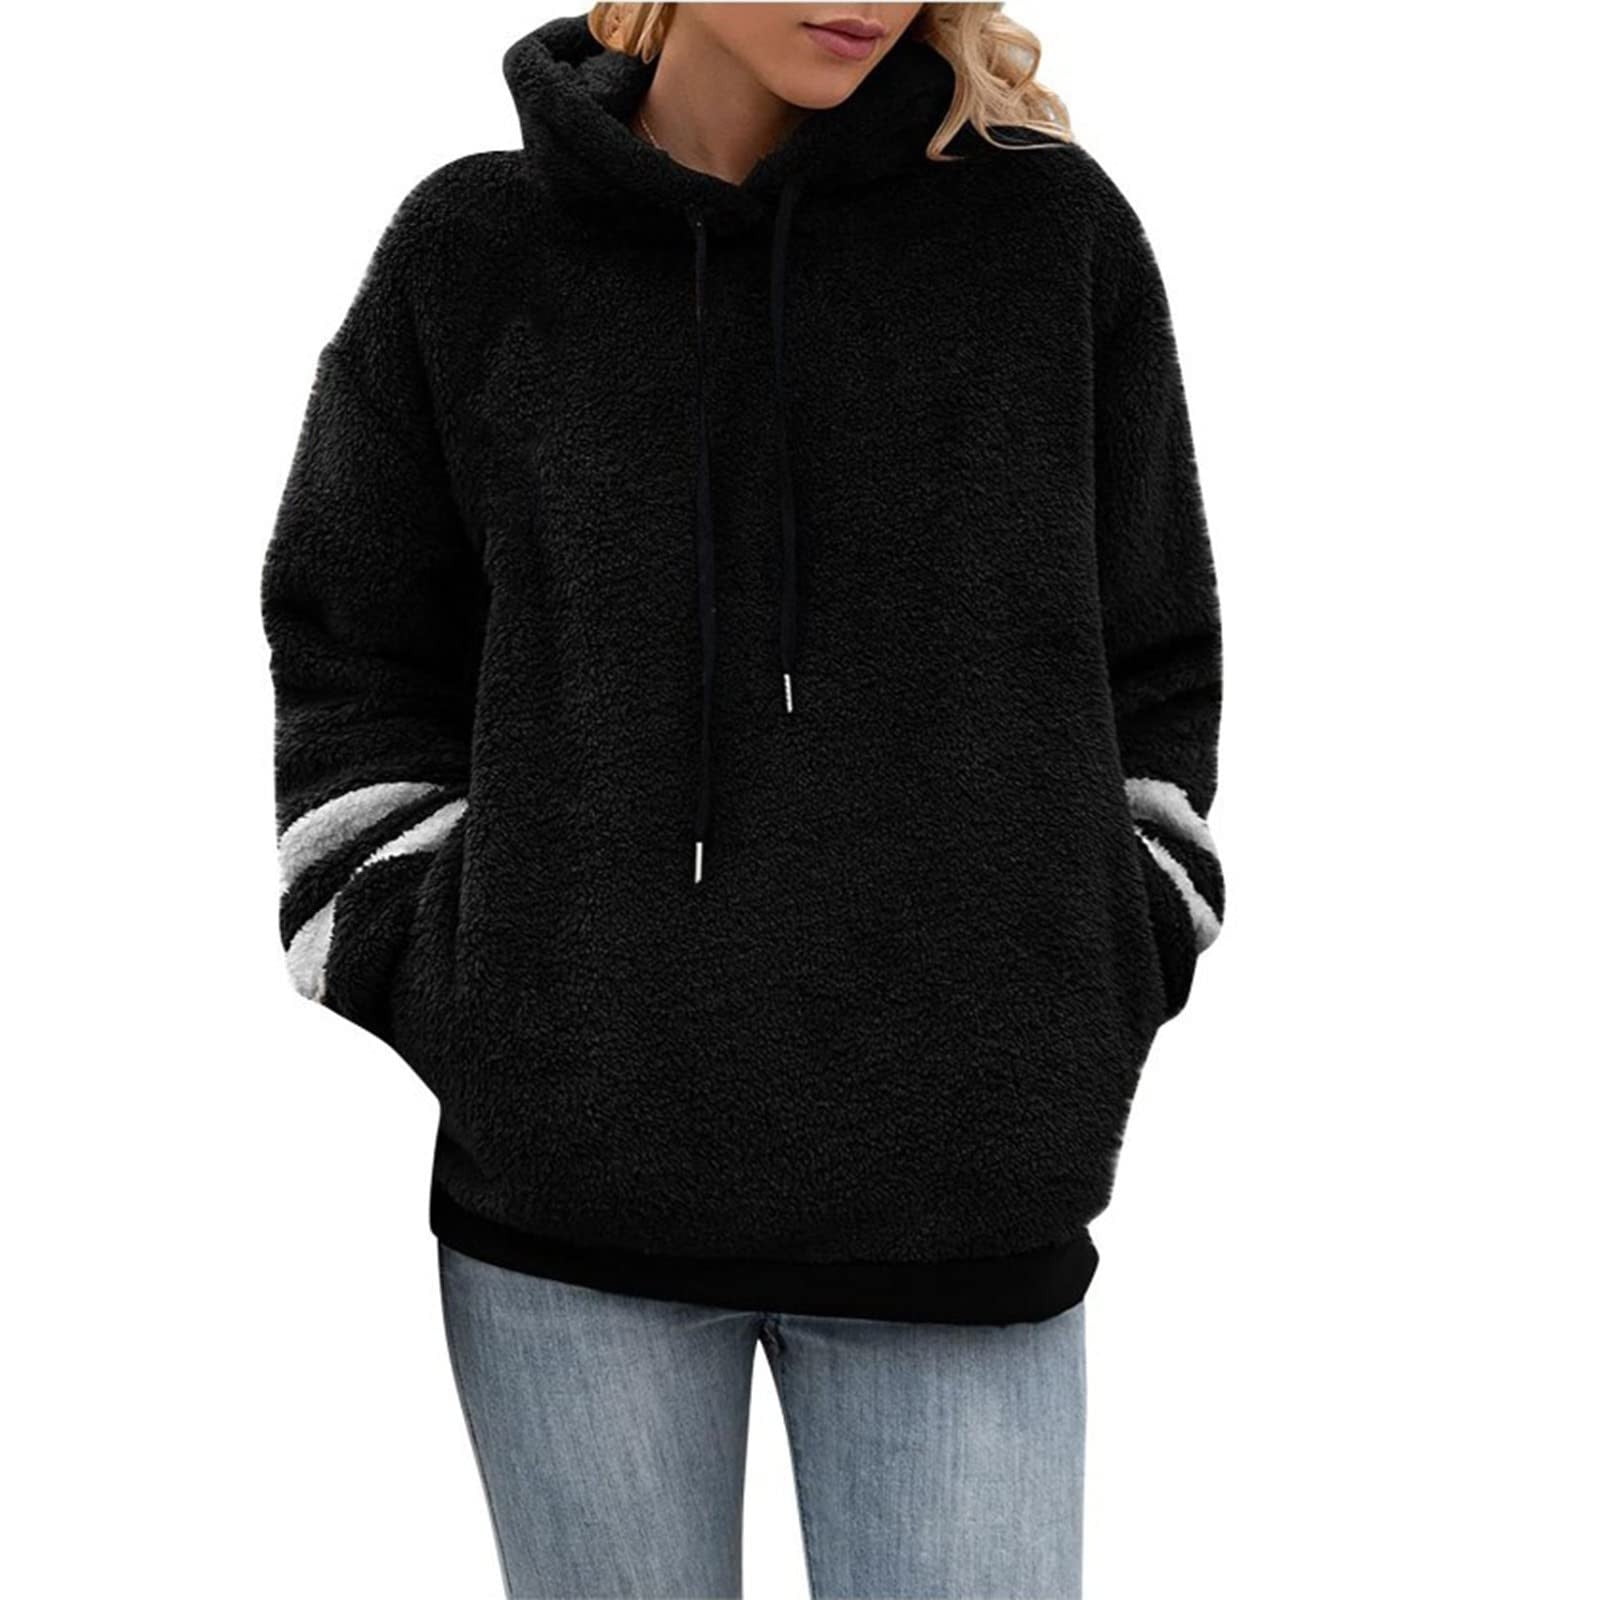 RQYYD Women's Fuzzy Hoodies Sport Pullover Hoodie Athletic Cozy